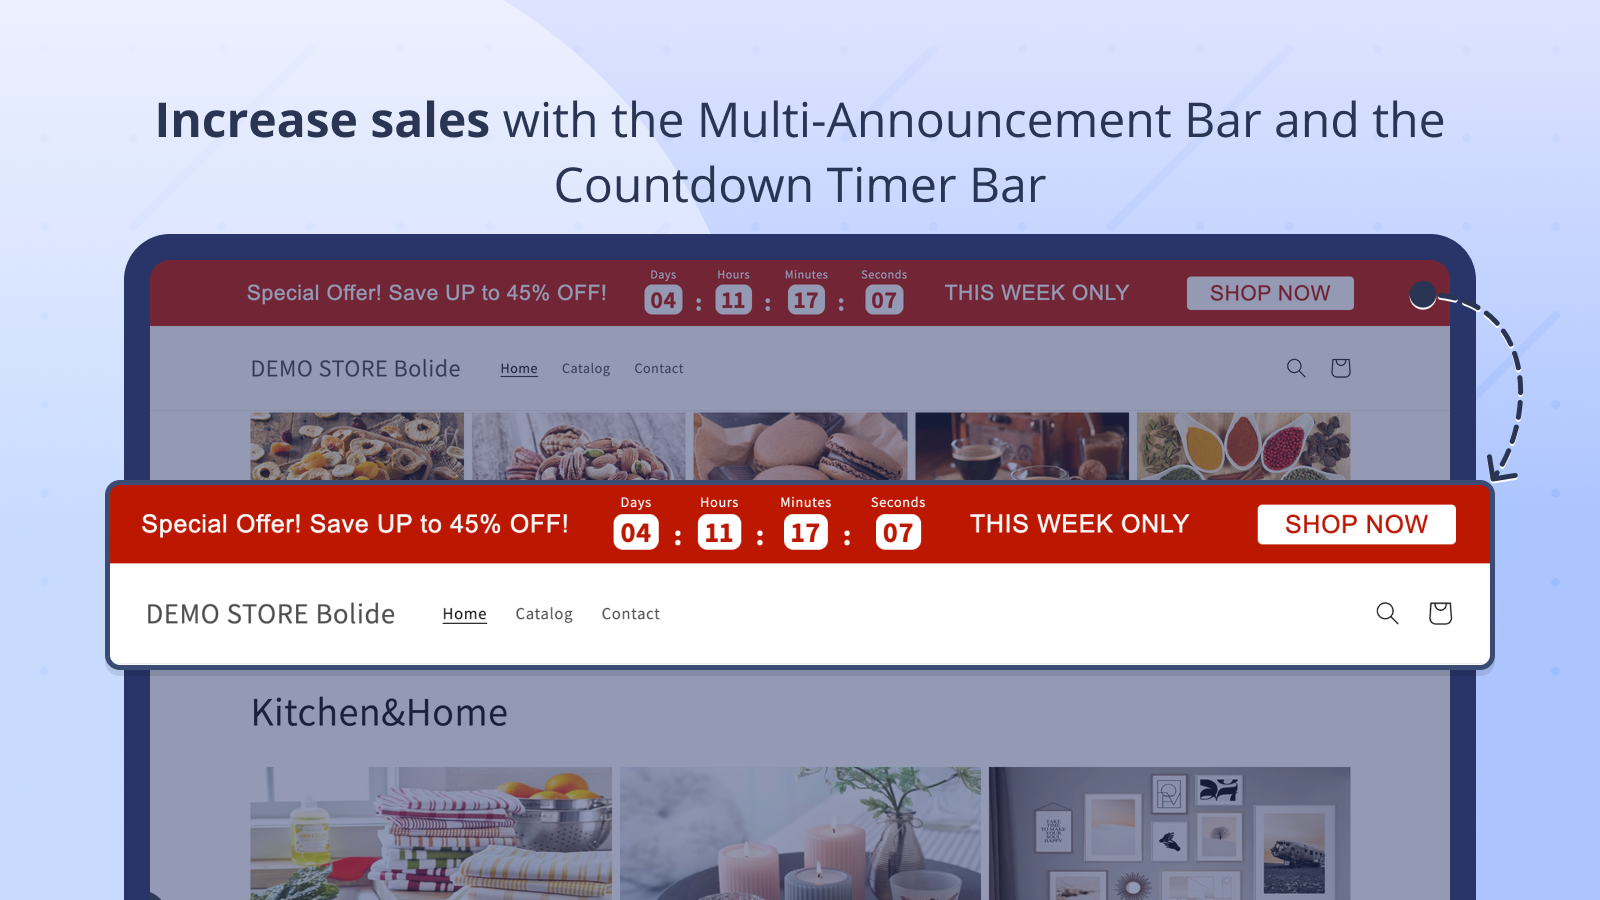 Increase sales with the Multi-Announcement Bar & Countdown Timer